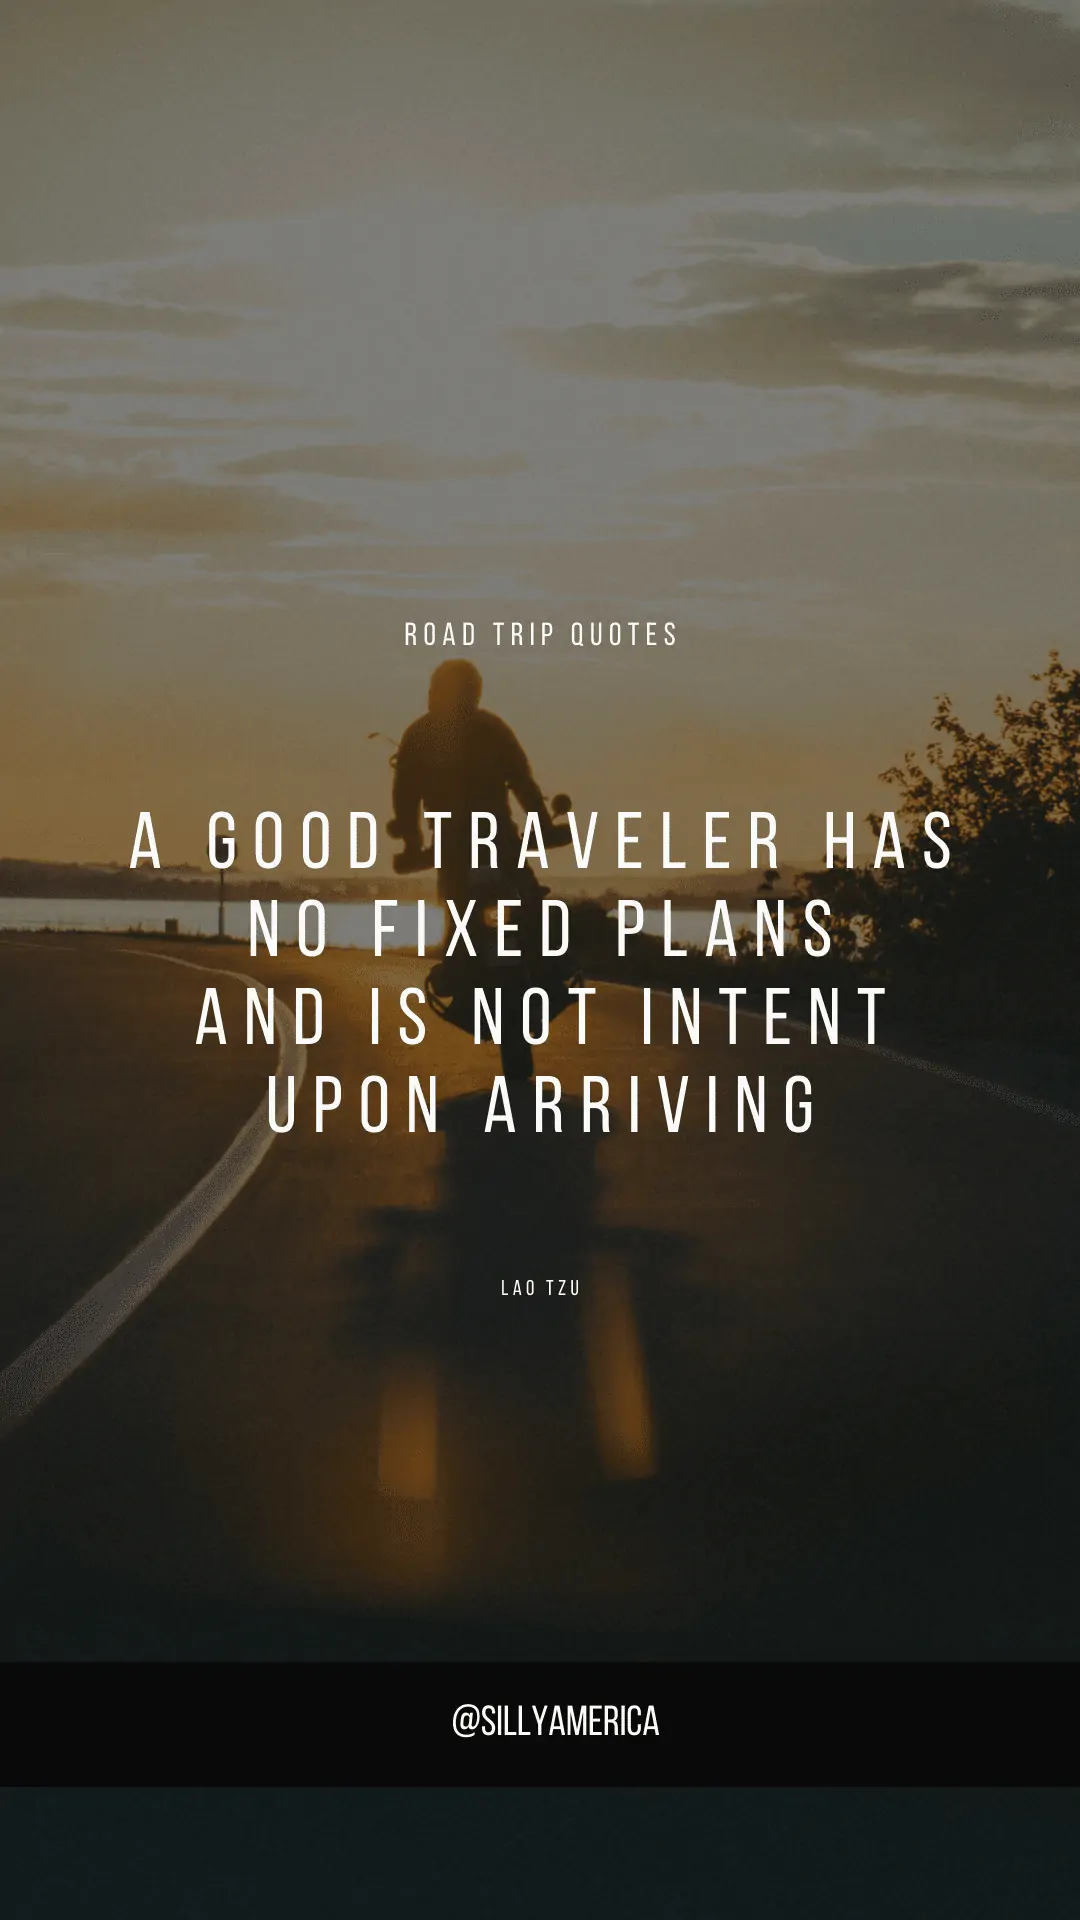 “A good traveler has no fixed plans and is not intent upon arriving.” Lao Tzu, Tao Te Ching